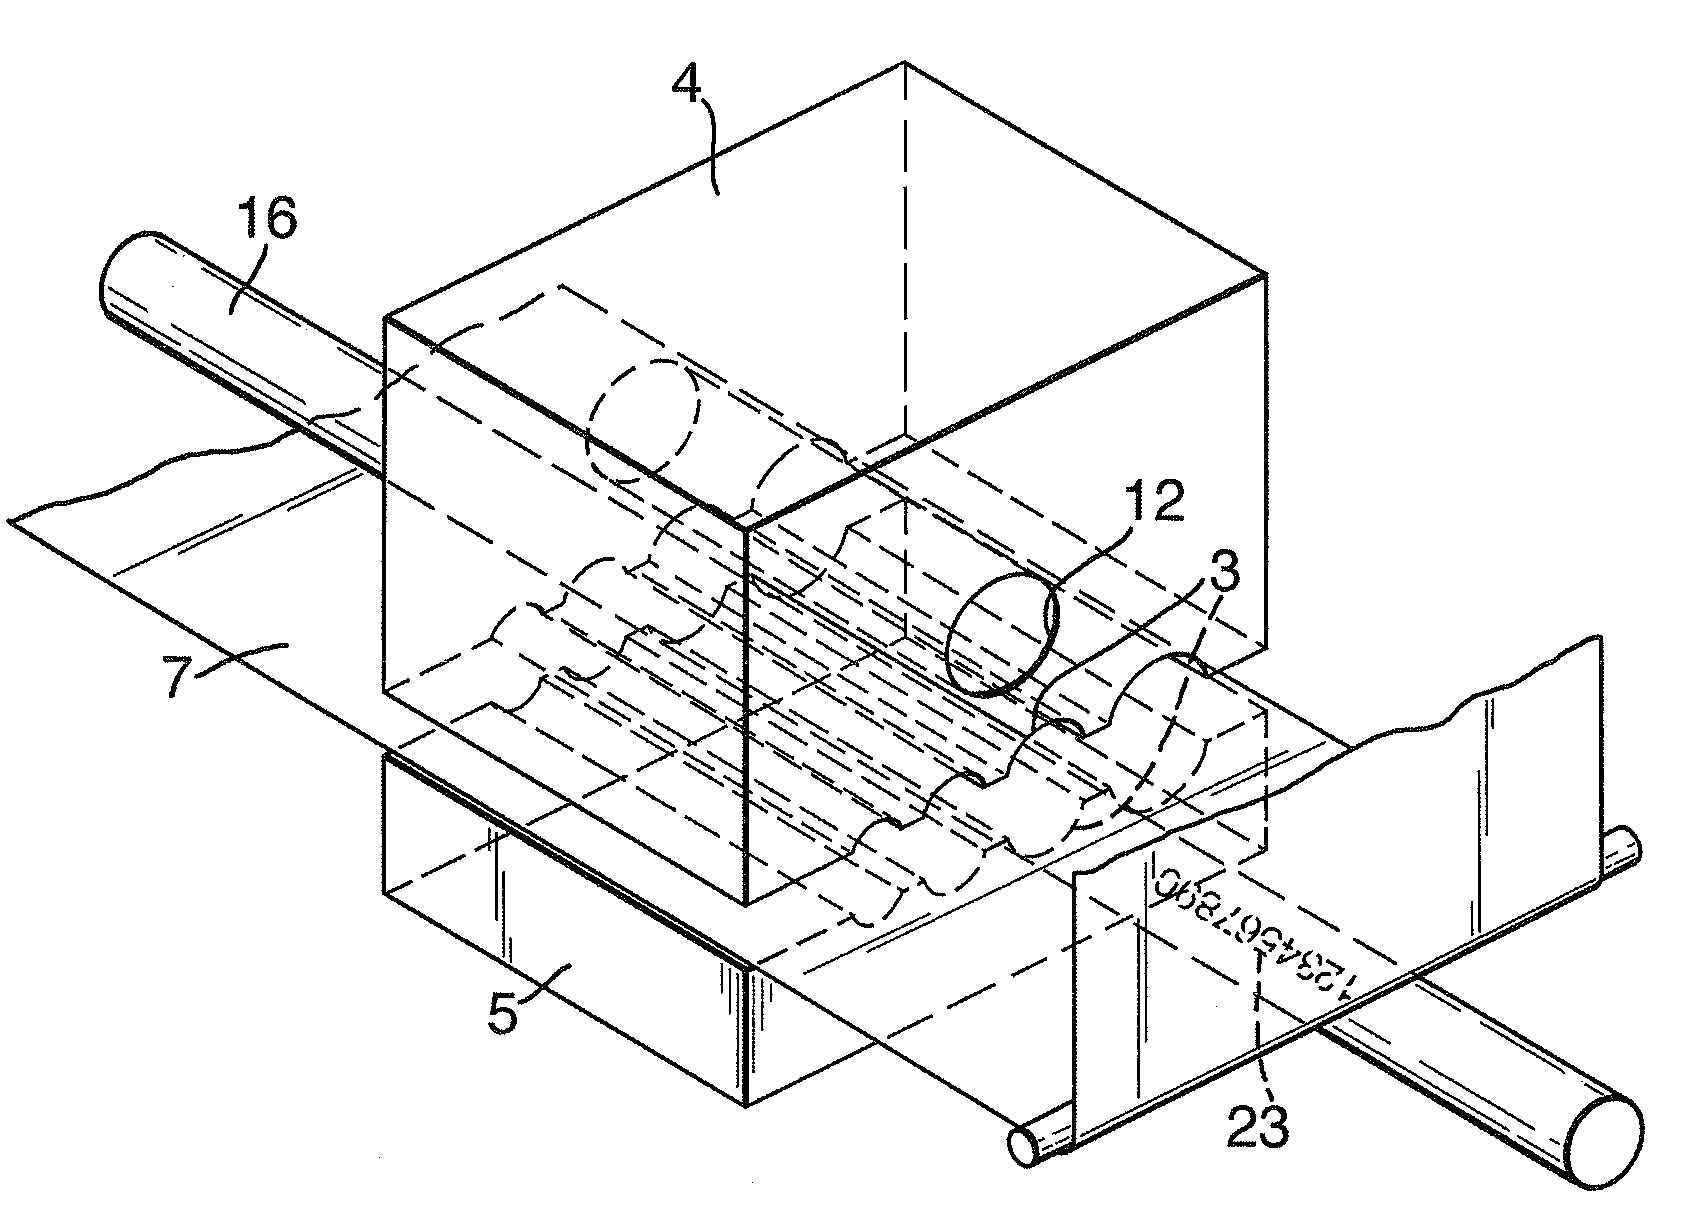 Printing device for printing markings onto insulated round wires